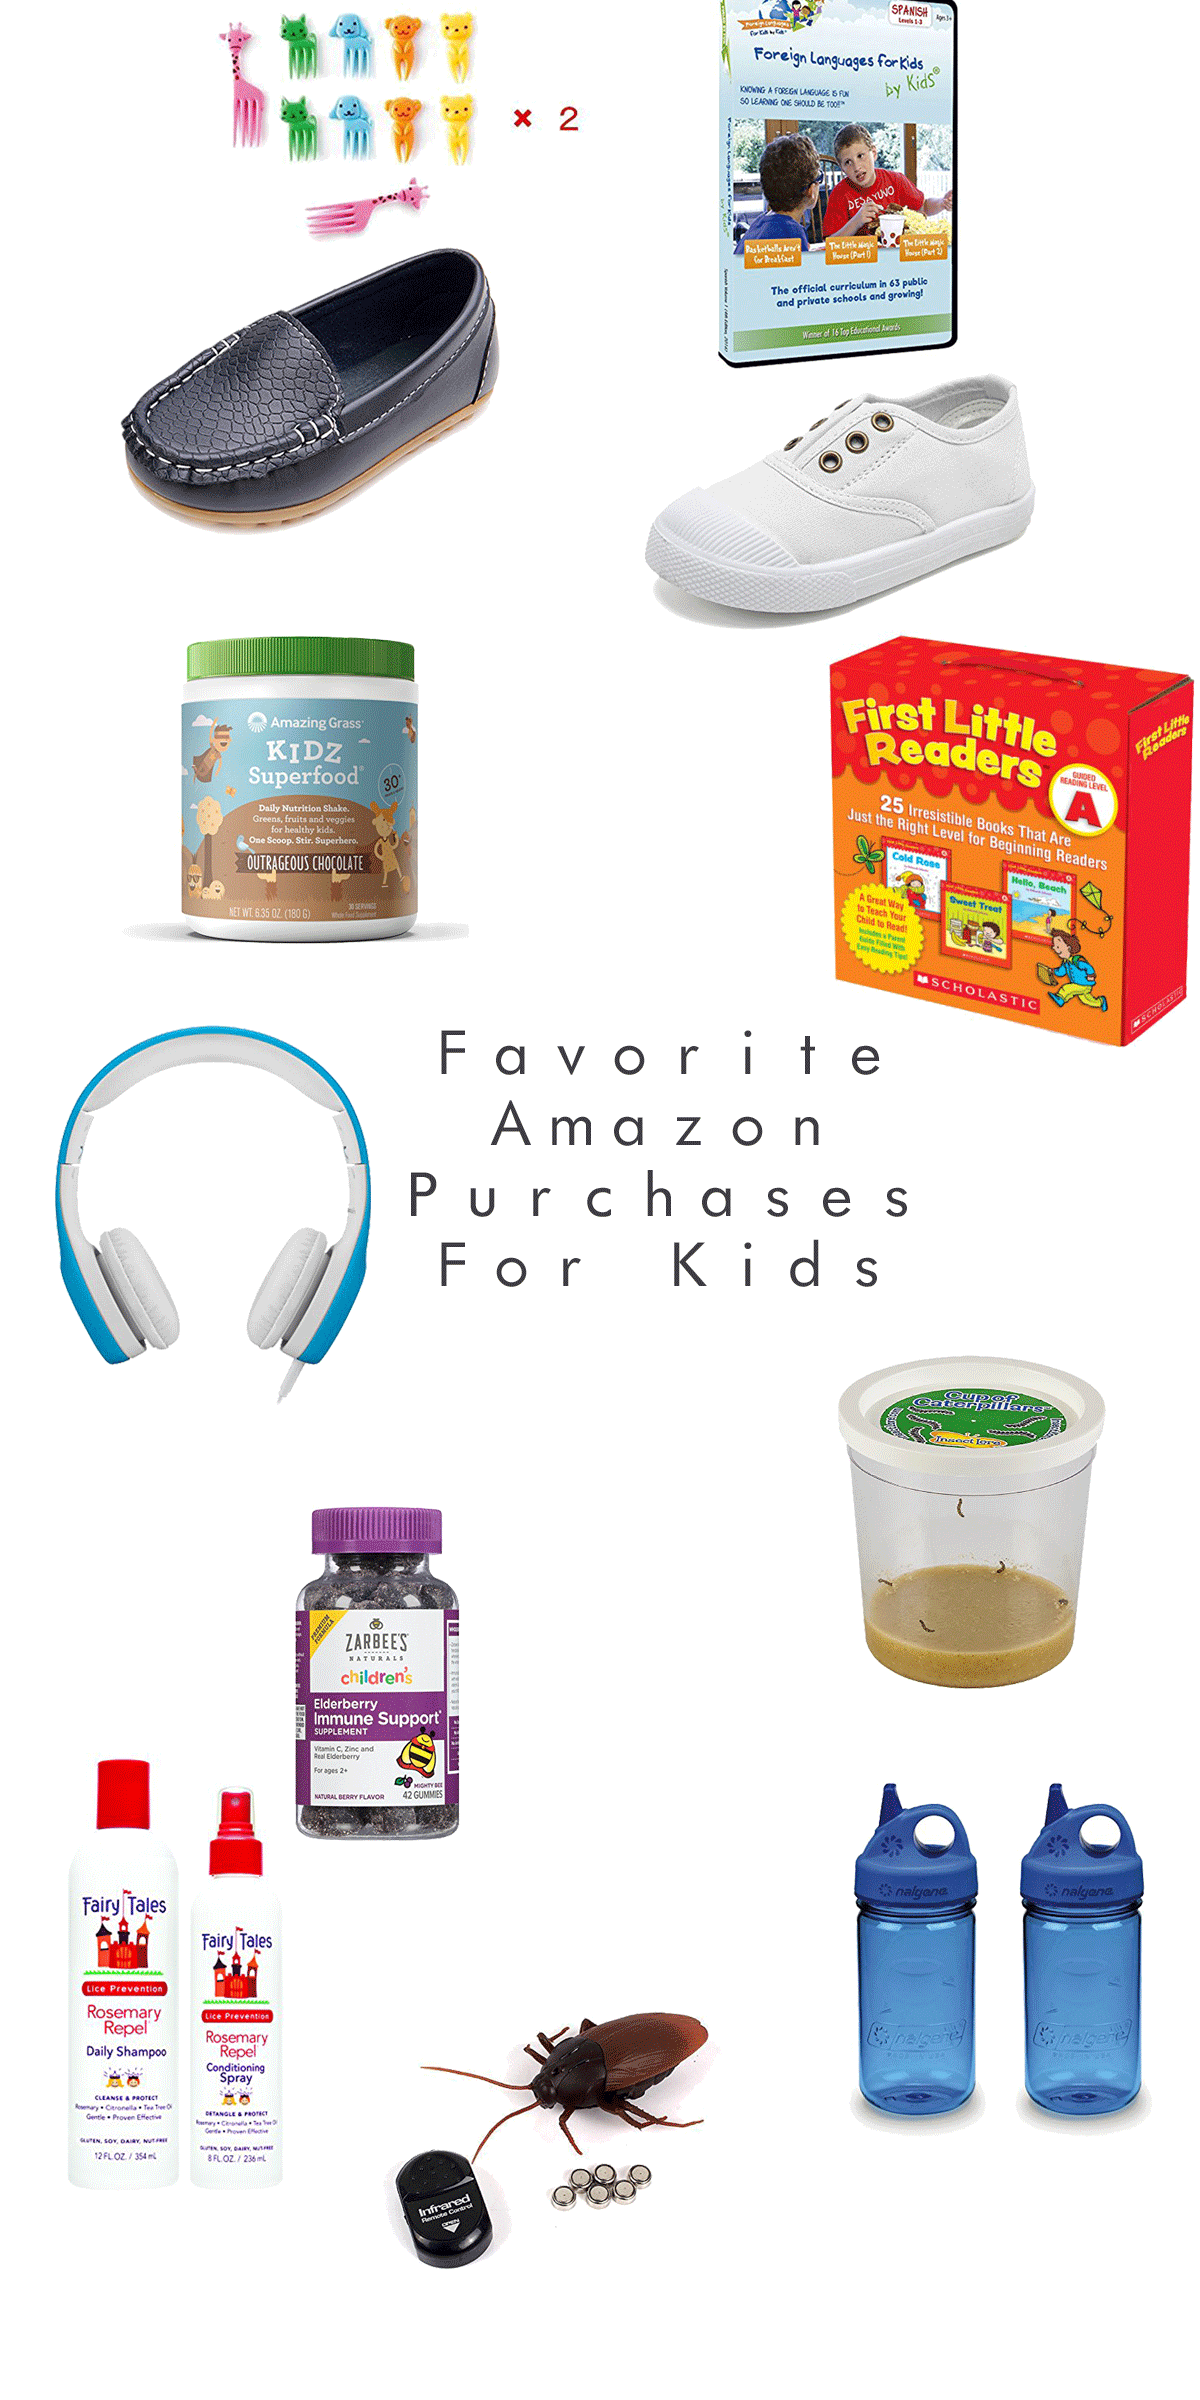 Amazon products for kids 